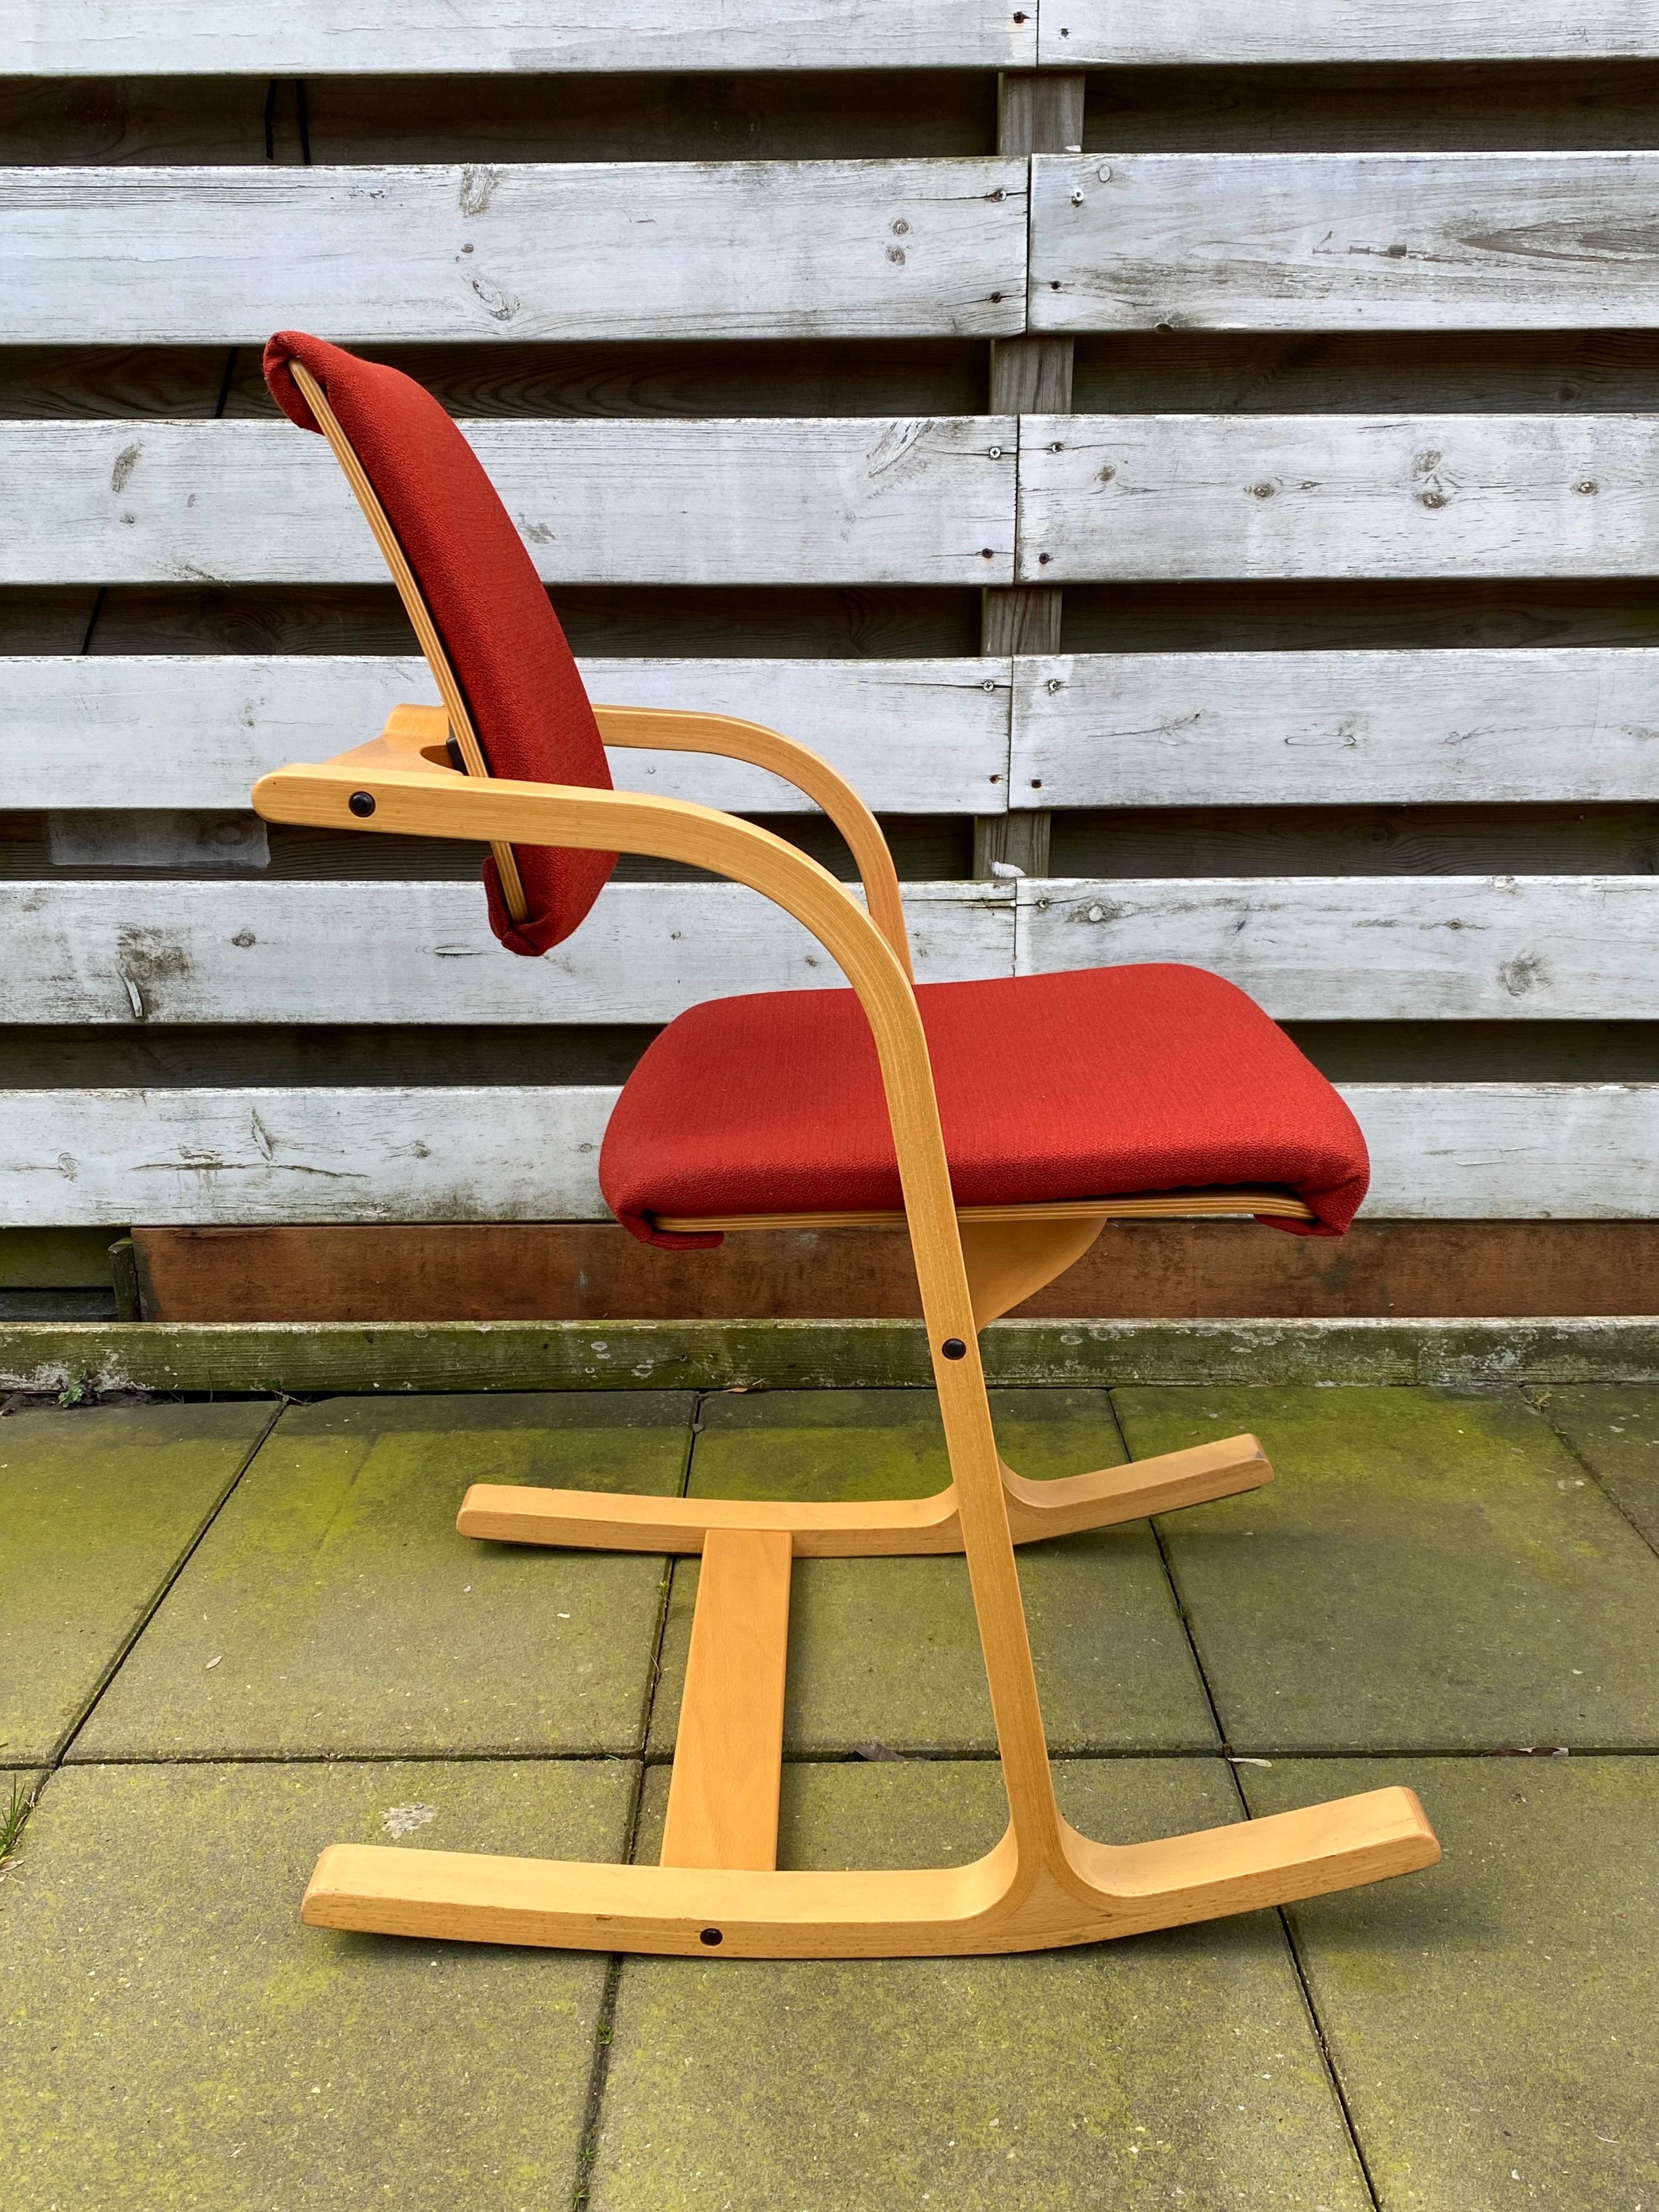 Stokke Varier Actulum, Balance Chairs, Dinner Chairs, Rocking Chairs 3